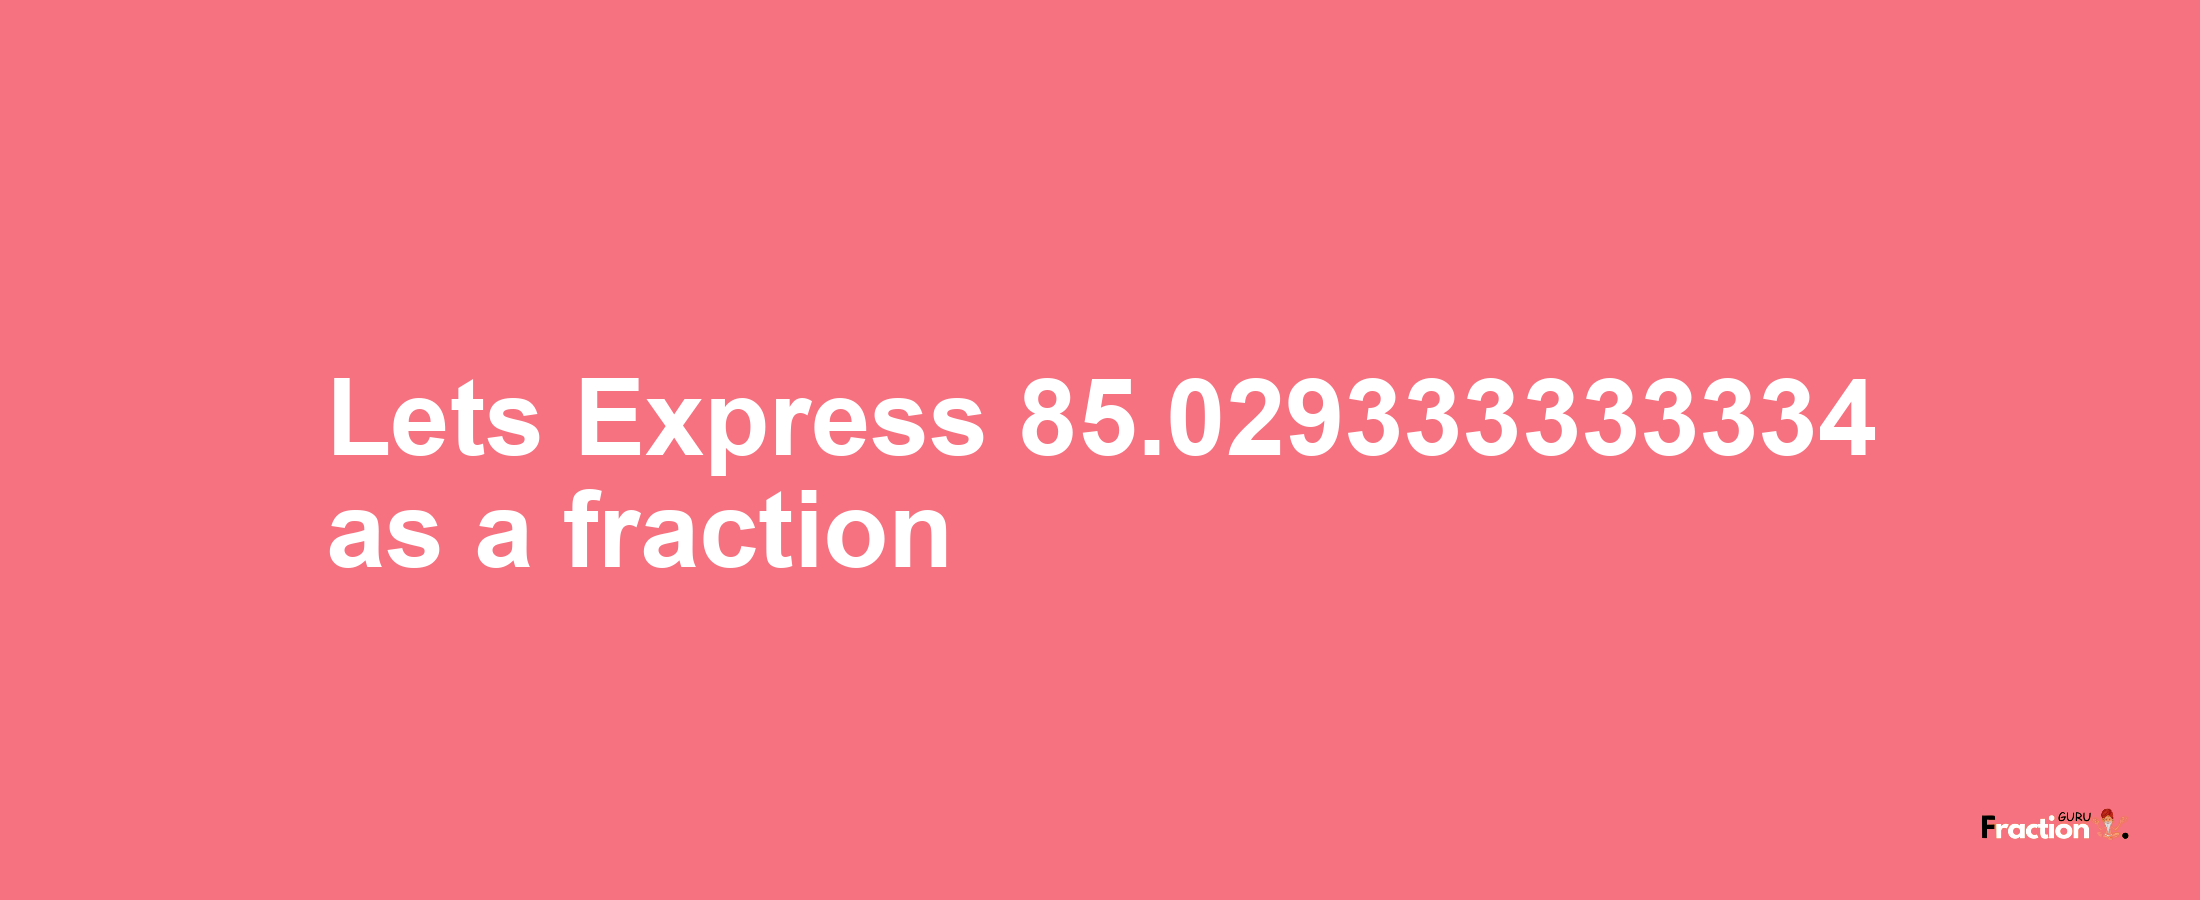 Lets Express 85.029333333334 as afraction